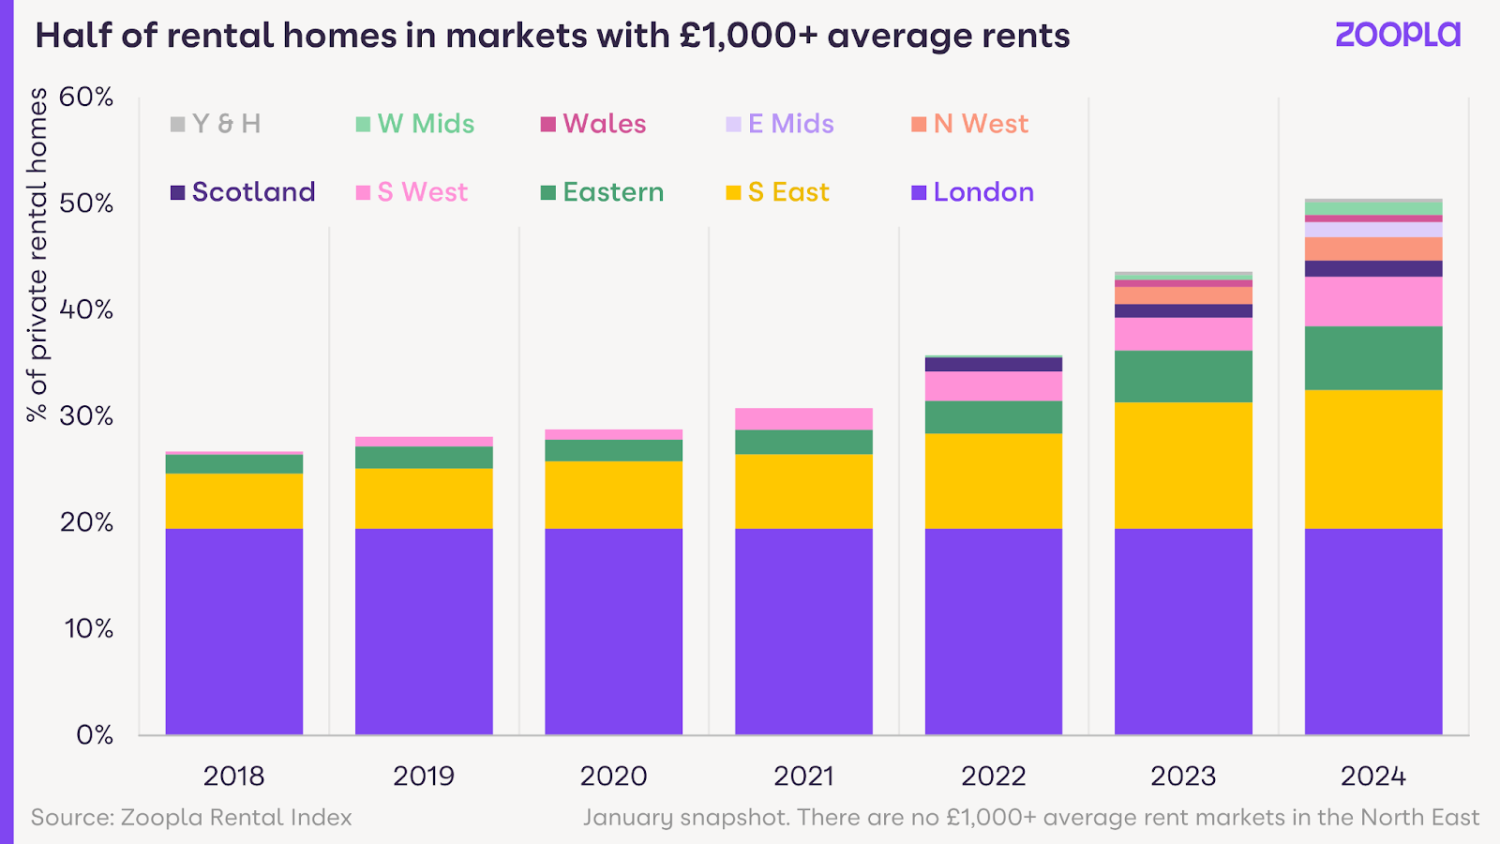 Graph showing that half of rental homes in markets with £1,000+ average rents